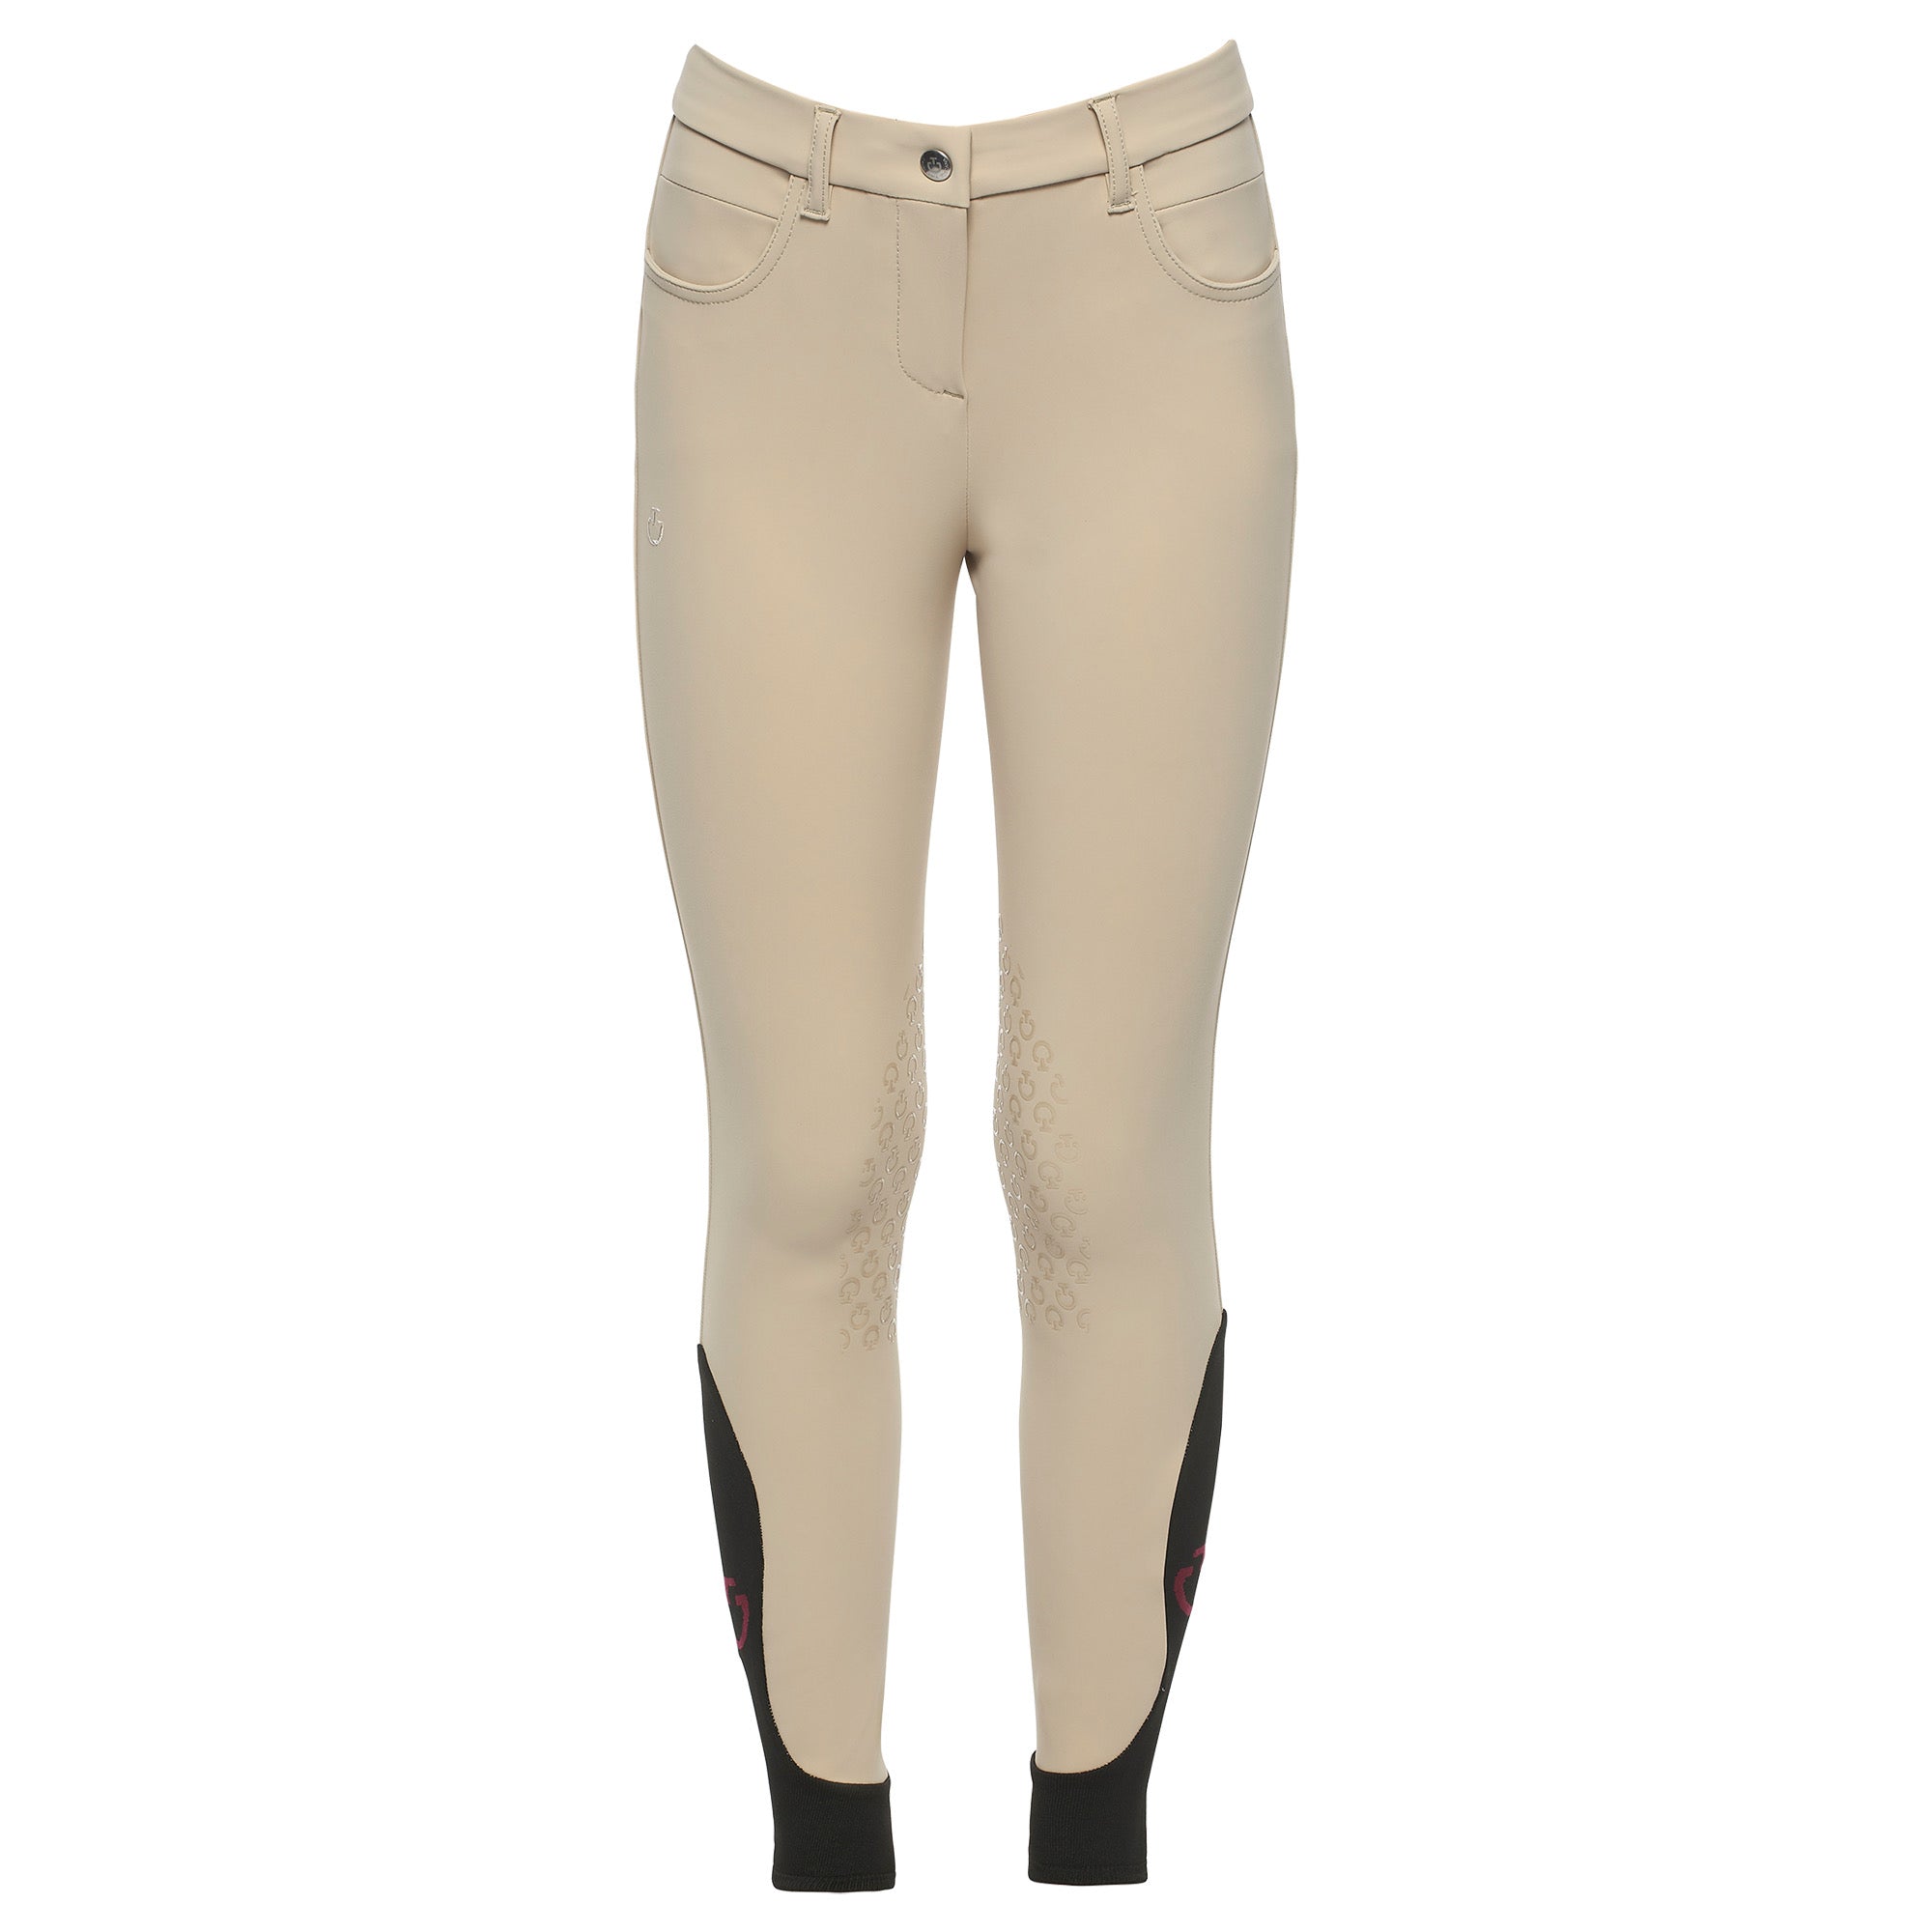 Cavalleria Toscana Girl's Knee Grip Breeches - Riding Breeches by Gee Gee Equine 